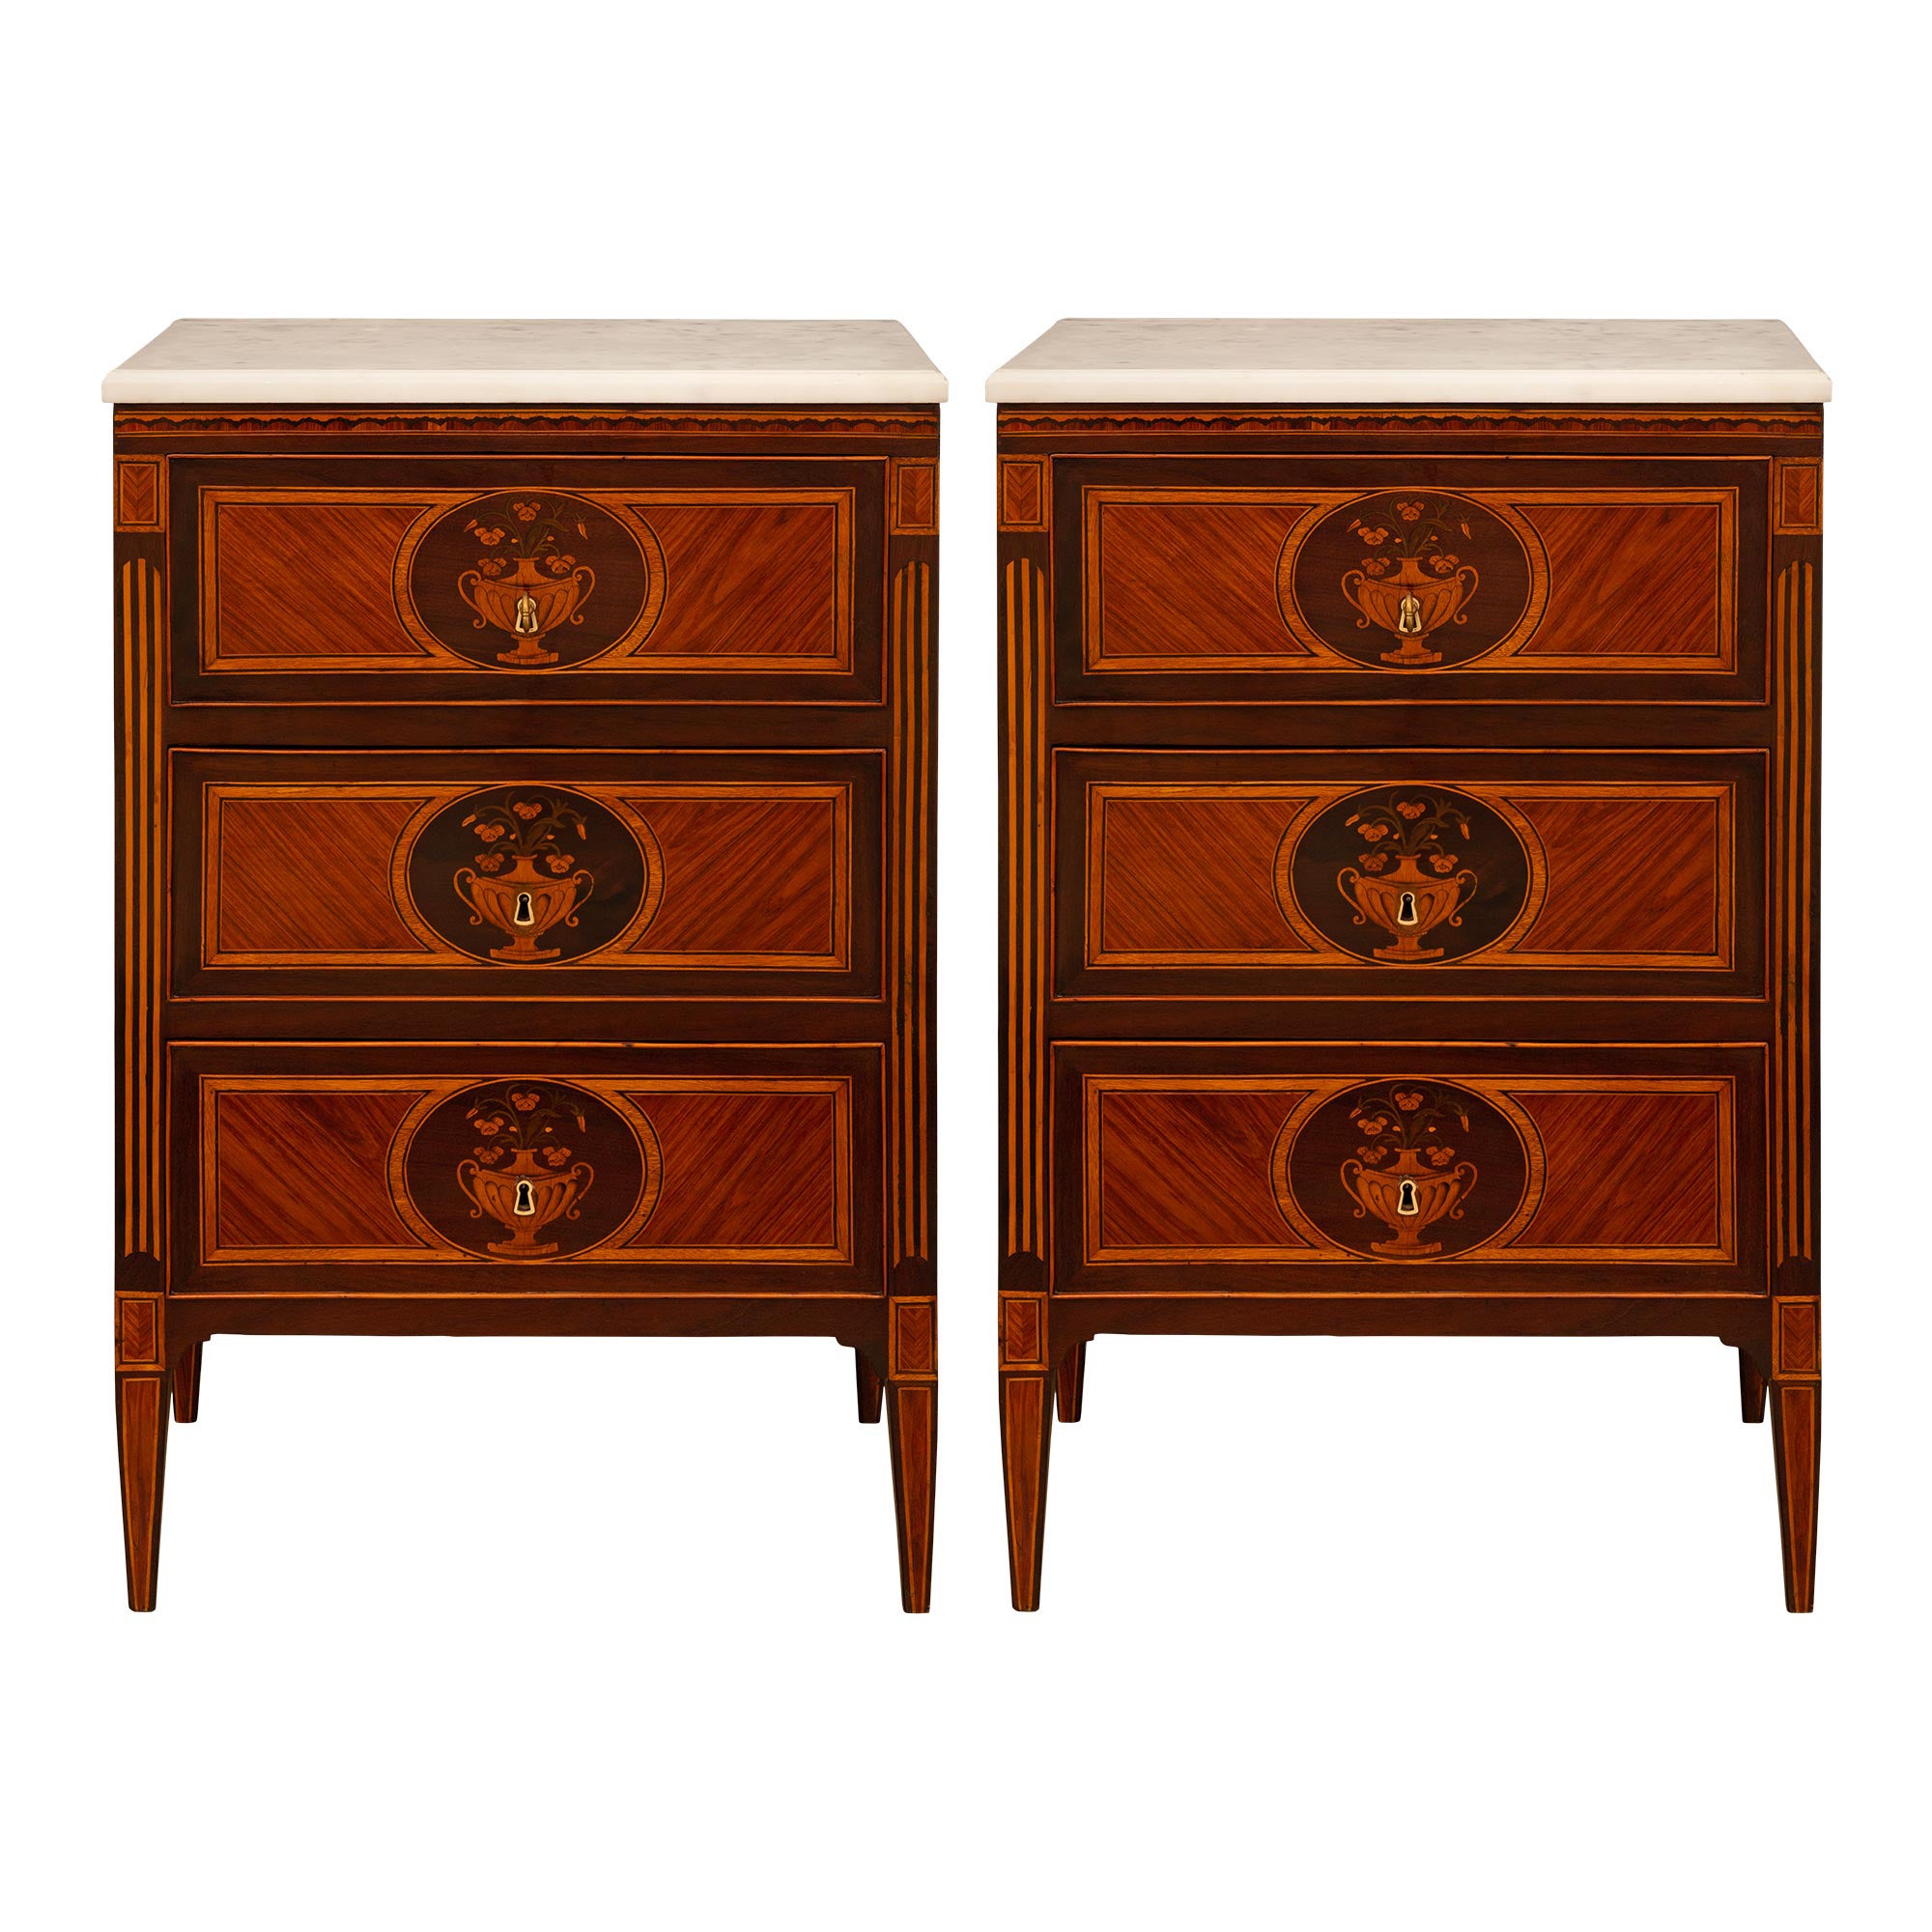 Pair Of Italian 19th c. Louis XVI St. Tulipwood, Fruitwood, & Mahogany Commodes For Sale